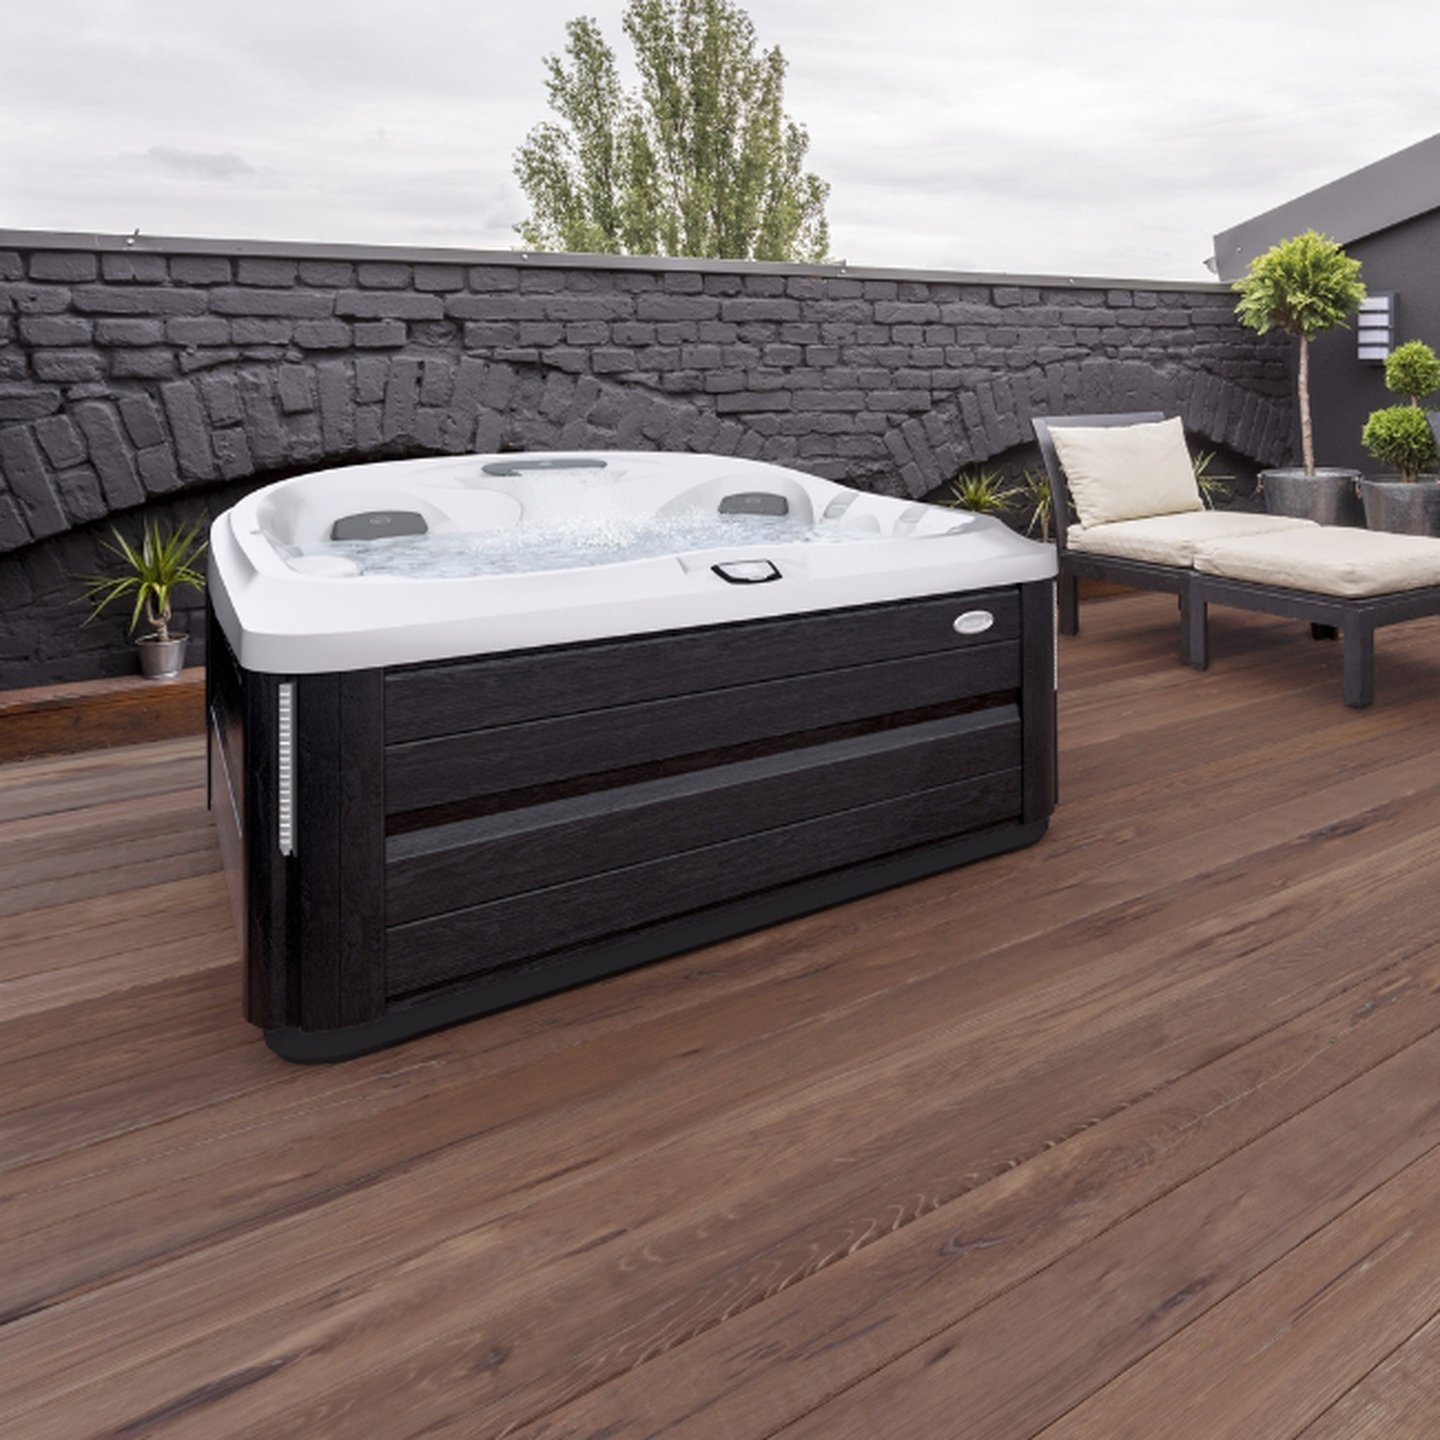 Hot tubs for sale near me